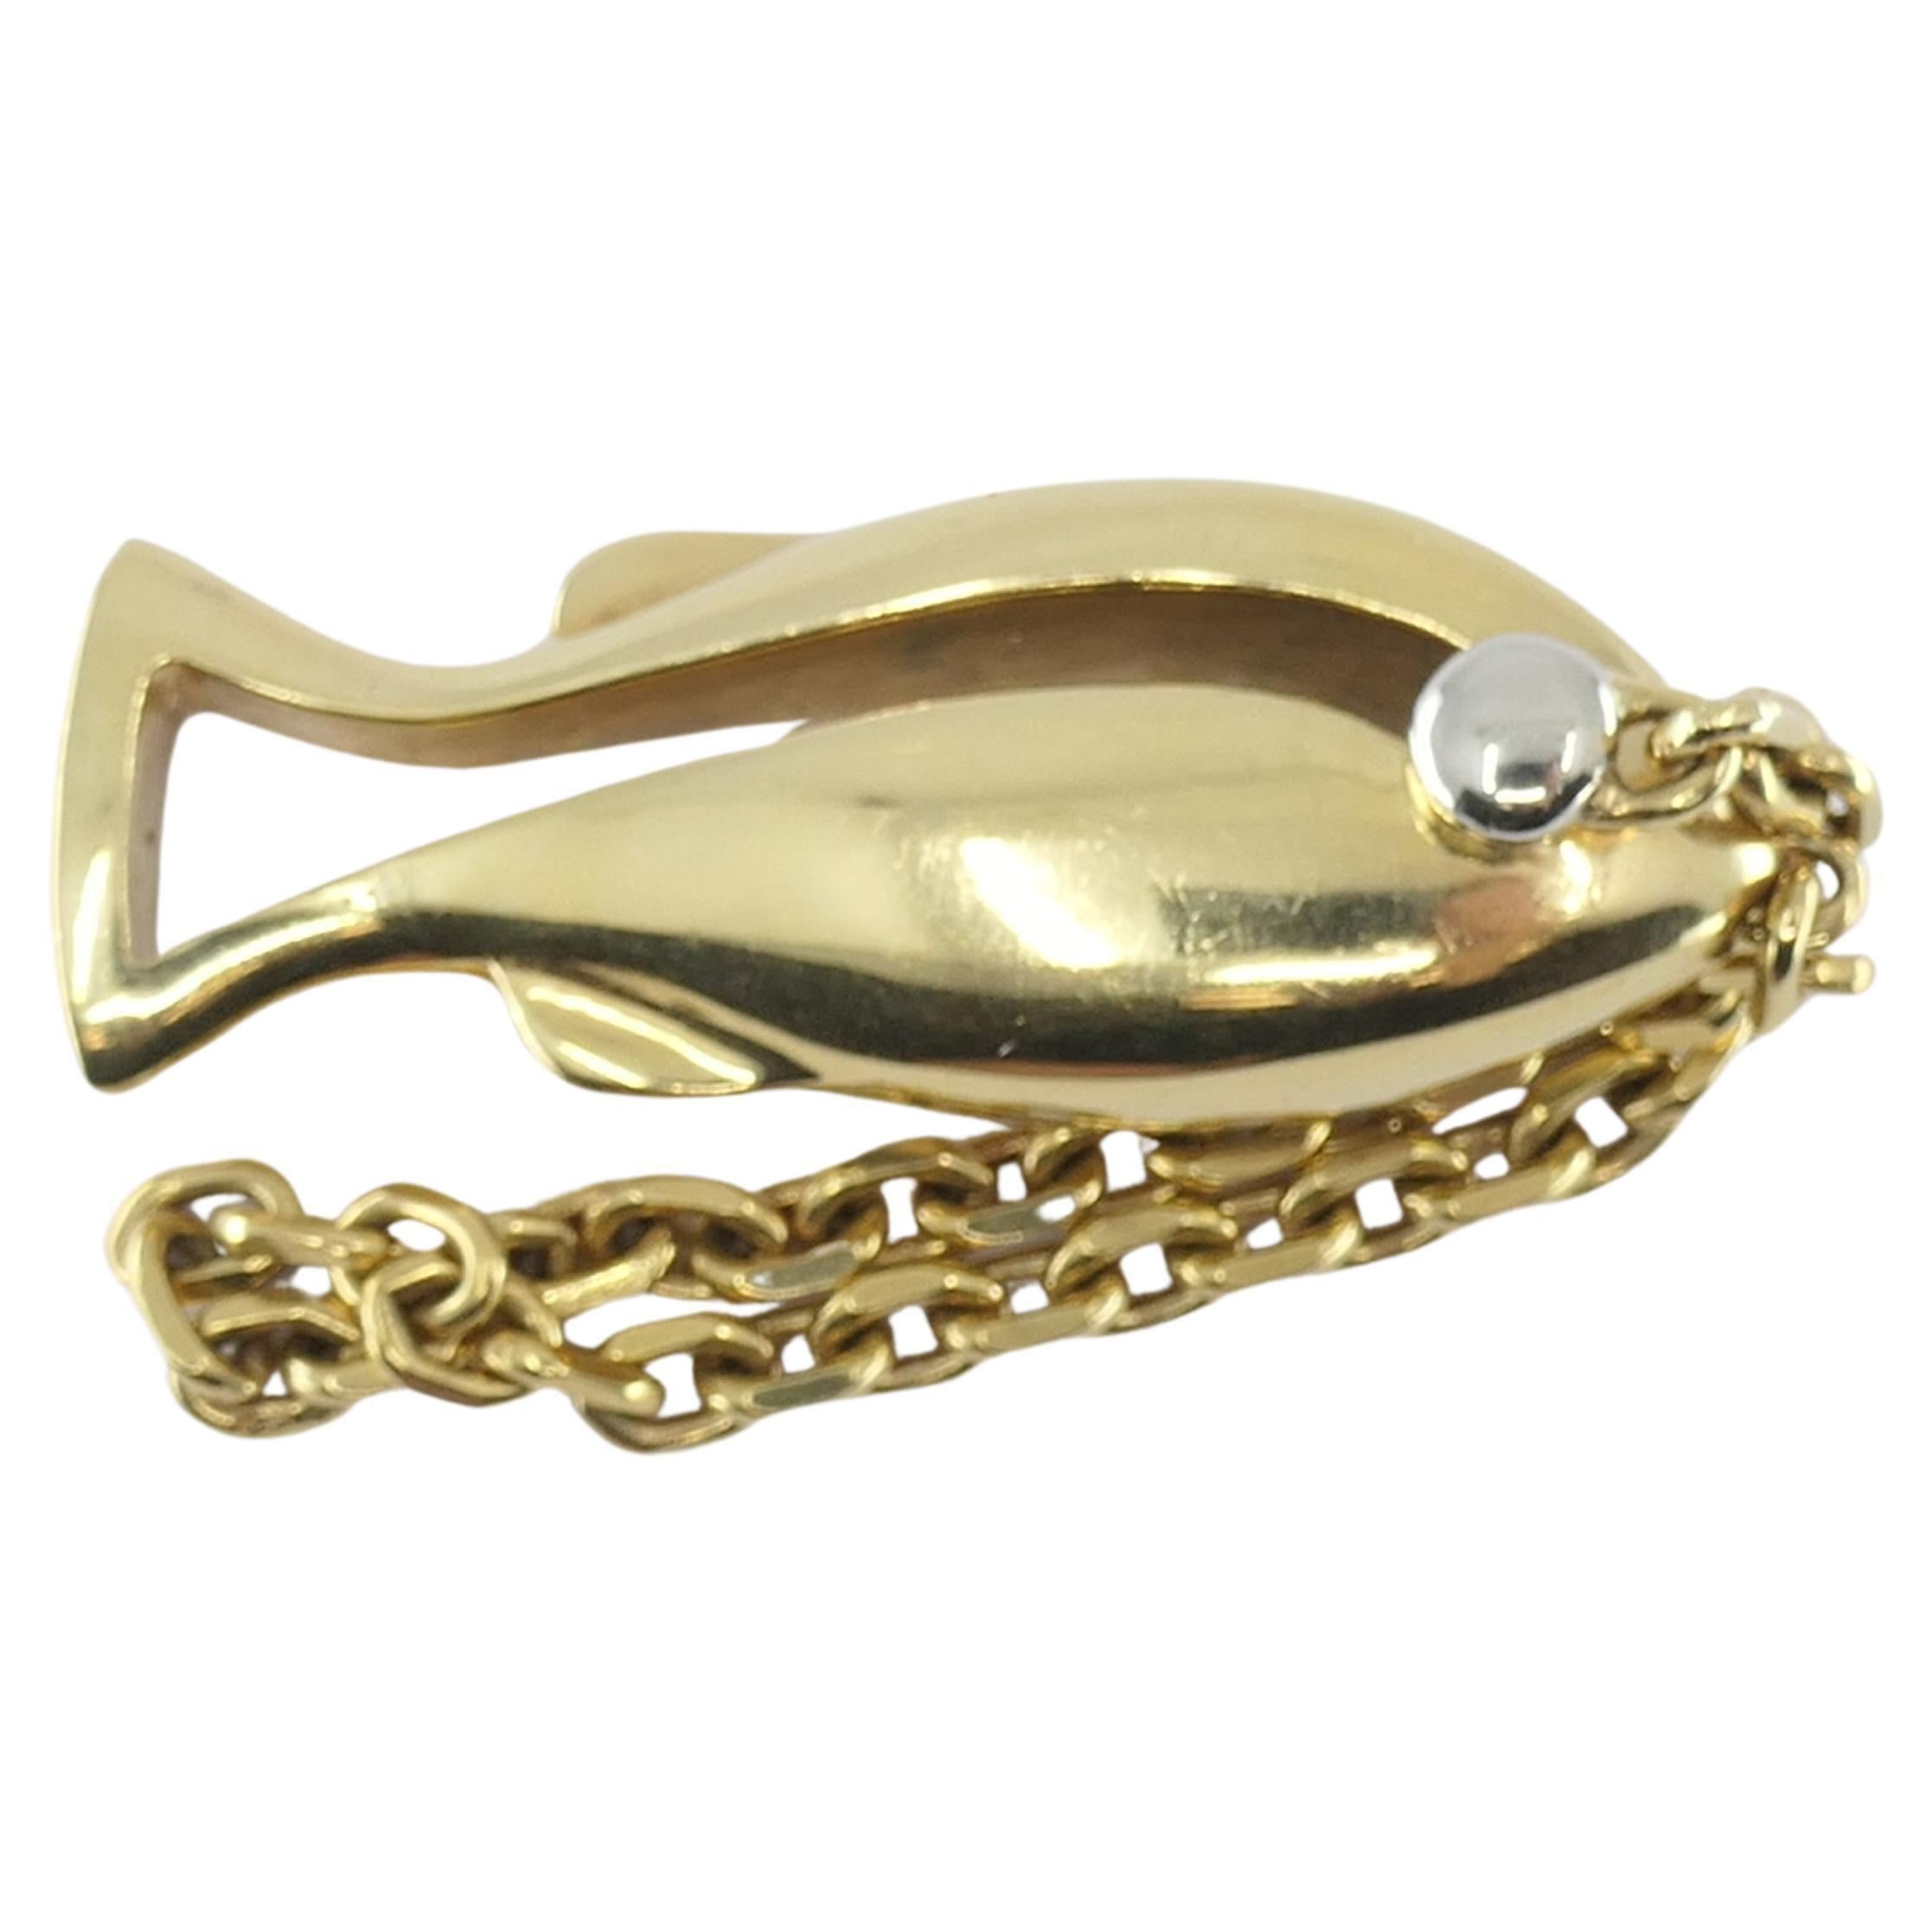 A vintage 18k gold charm key ring singed by Van Cleef & Arpels.
The charm is designed as a fish, with an open work yellow gold body and eyes accented with the white gold. It's a cute yet stylish piece that can be worn either as a pendant or a key